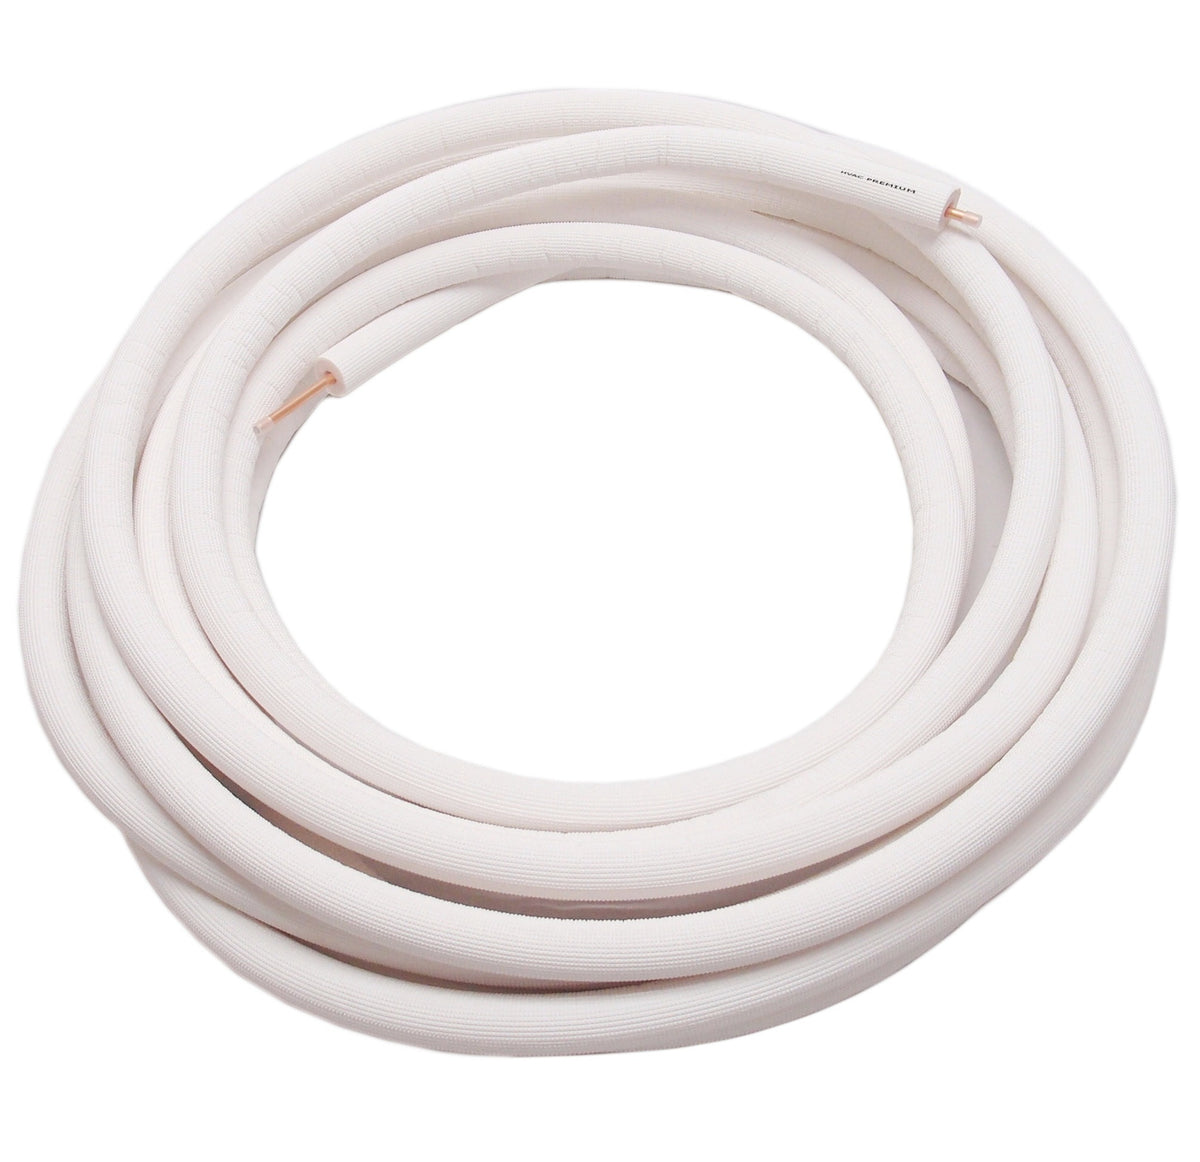 5/8&quot; Insulated Copper Coil Line - Seamless Pipe Tube for HVAC, Refrigerant - 1/2&quot; White Insulation - 164&#39; Long